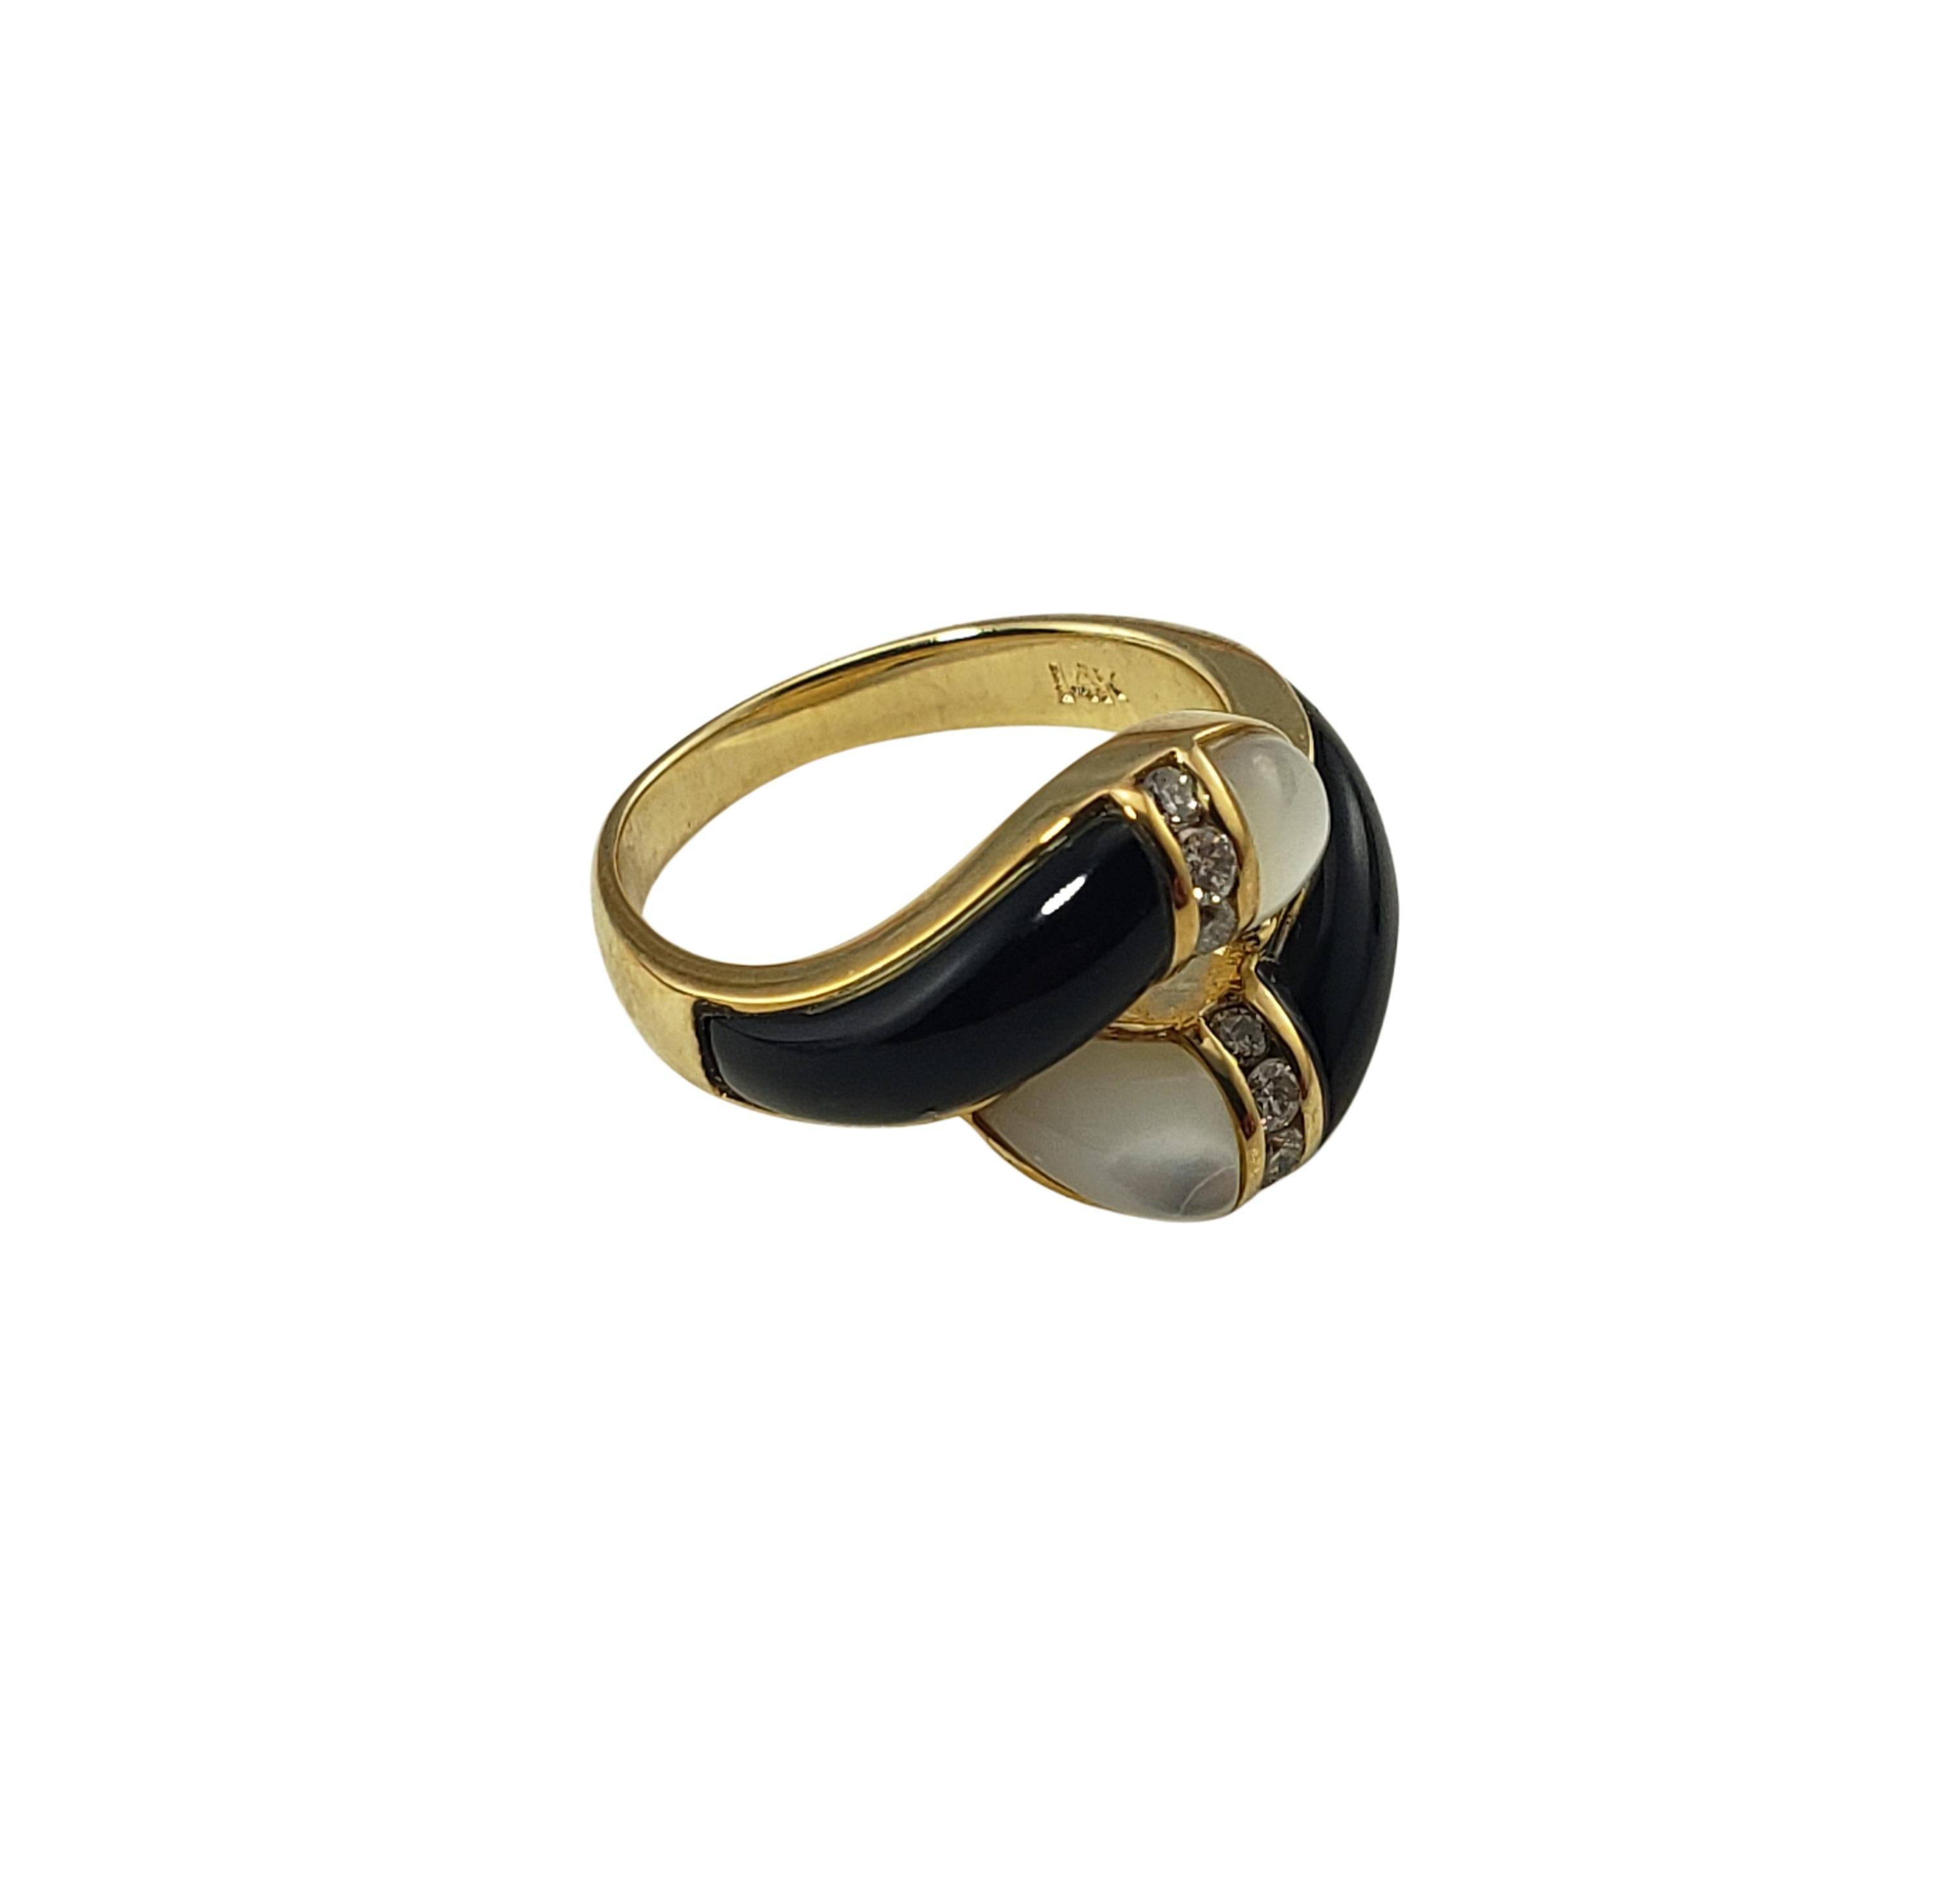 Vintage 14 Karat Yellow Gold Black/White Onyx and Diamond Ring Size 6.25-

This lovely black and white onyx ring features eight round brilliant cut diamond set in classic 14K yellow gold. Width: 14 mm.
Shank: 3 mm.

Approximate total diamond weight: